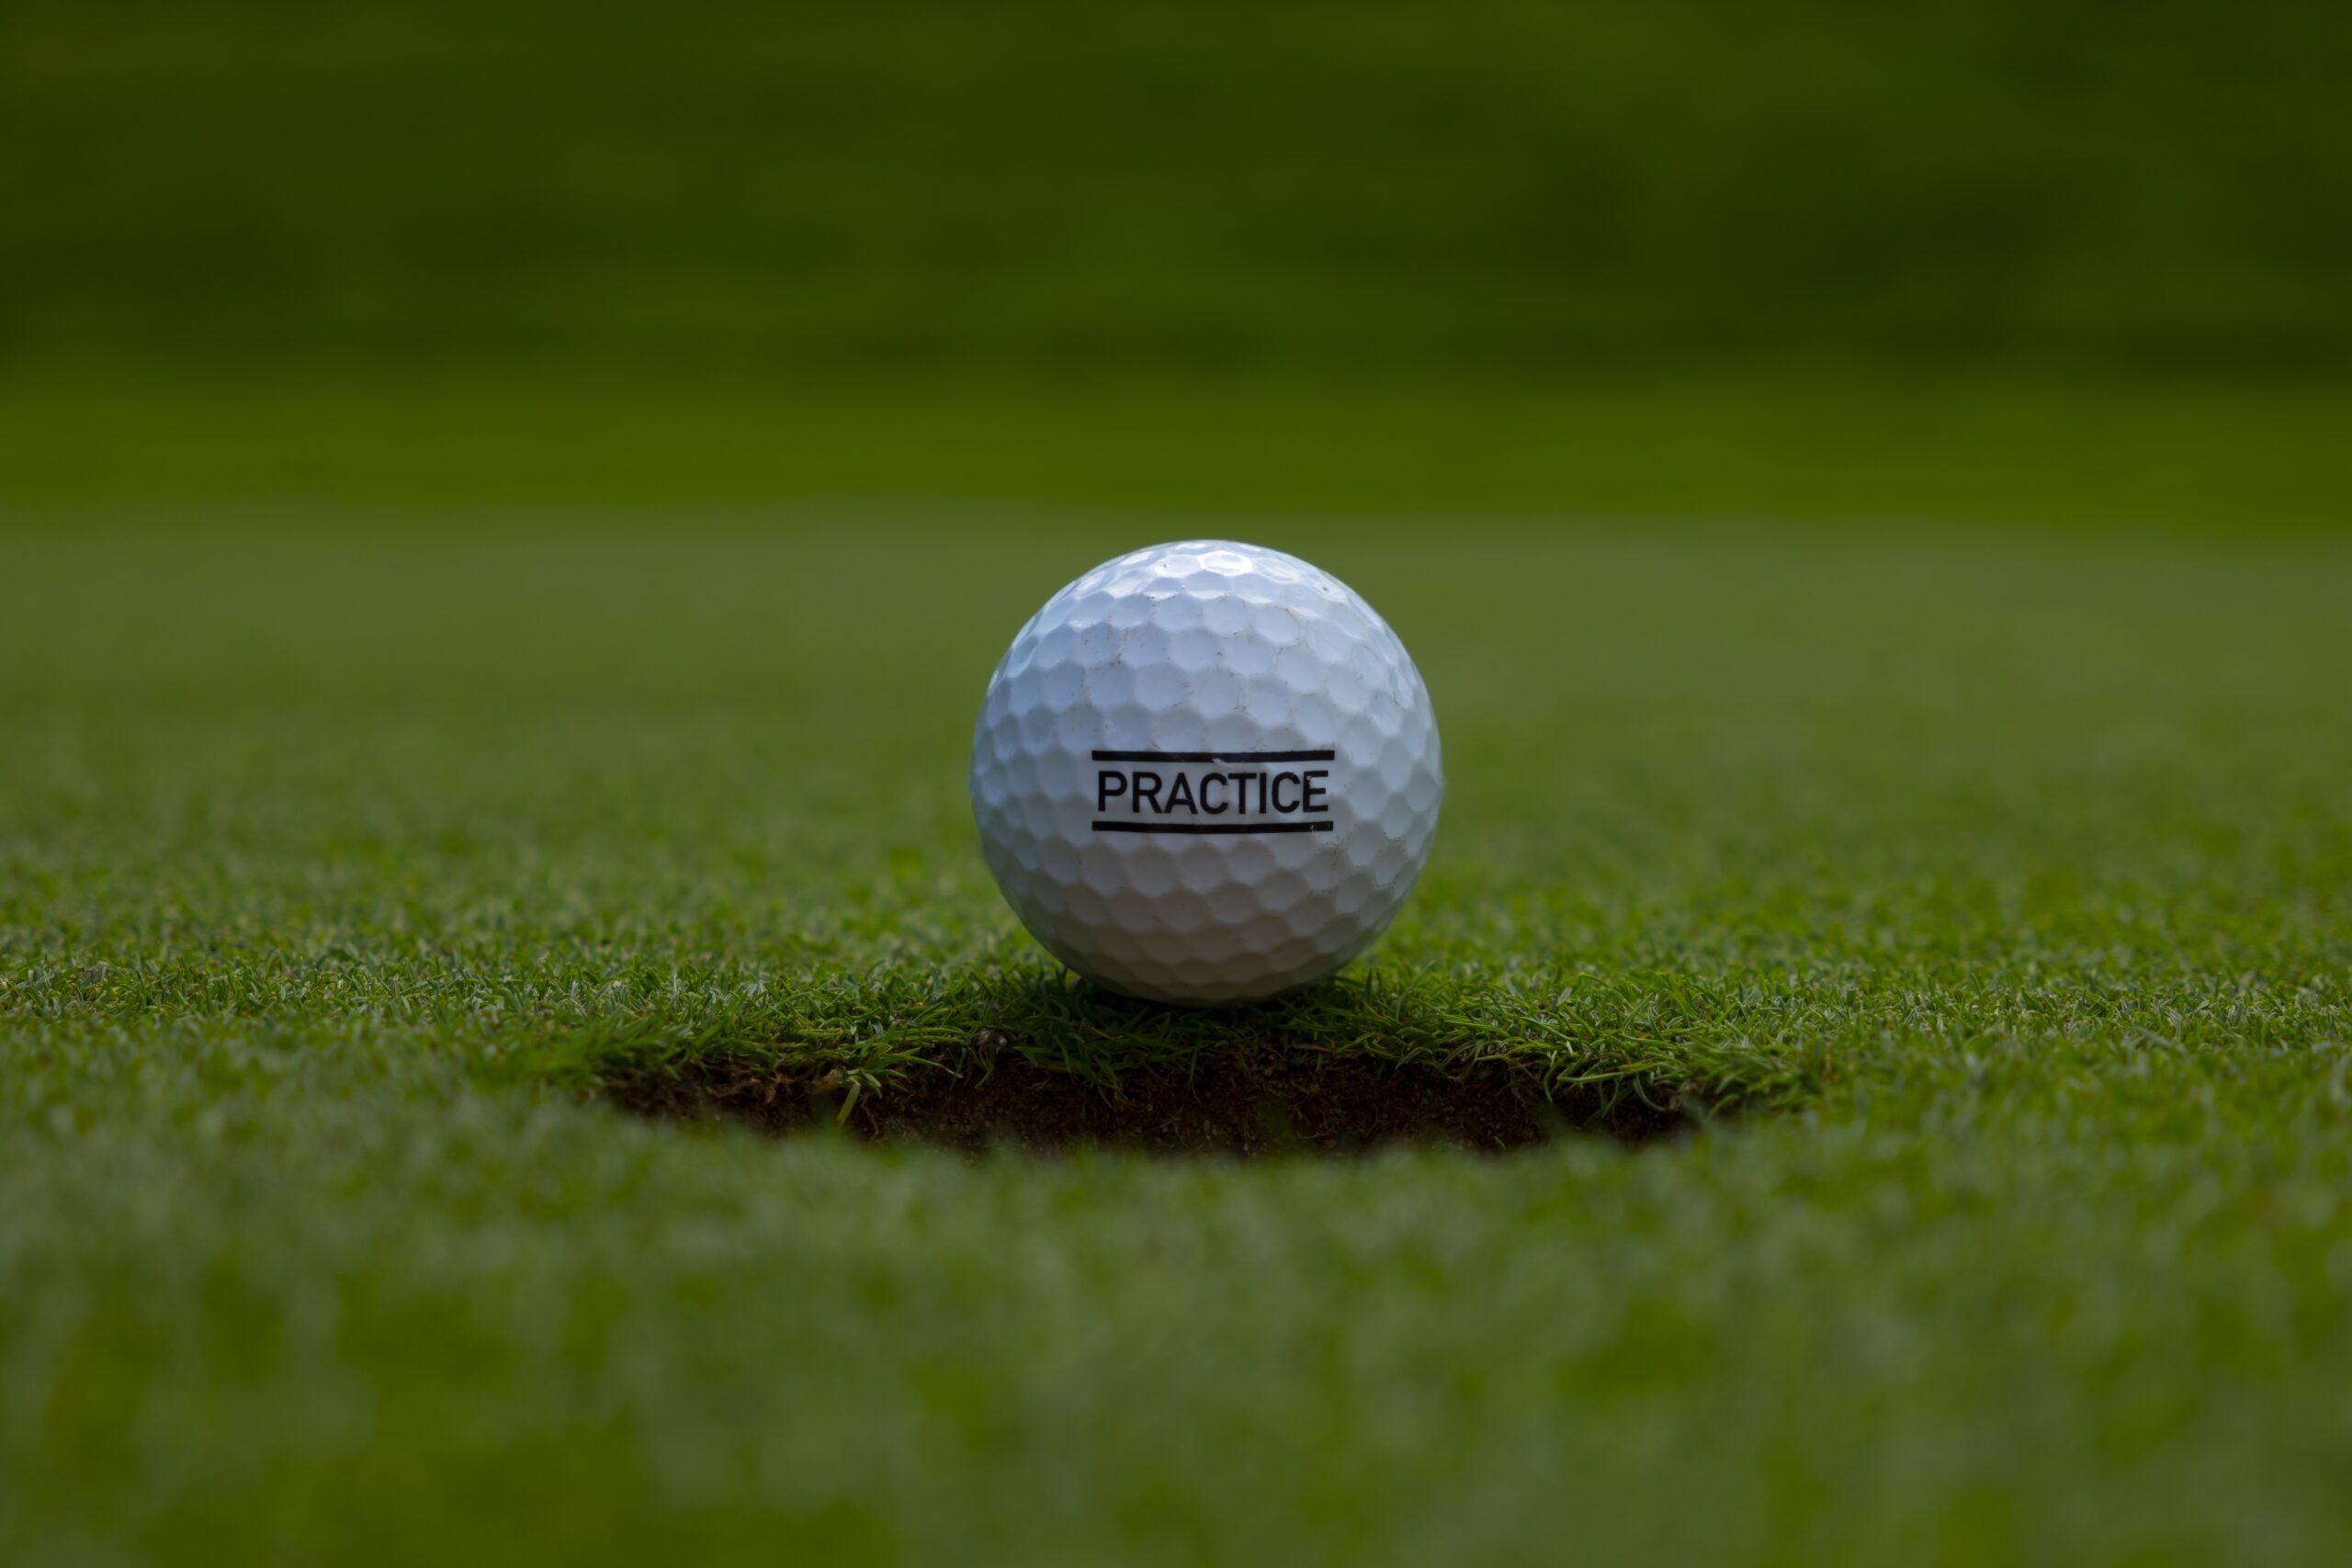 A closeup of a practice text written on a golf ball on the lawn under the sunlight